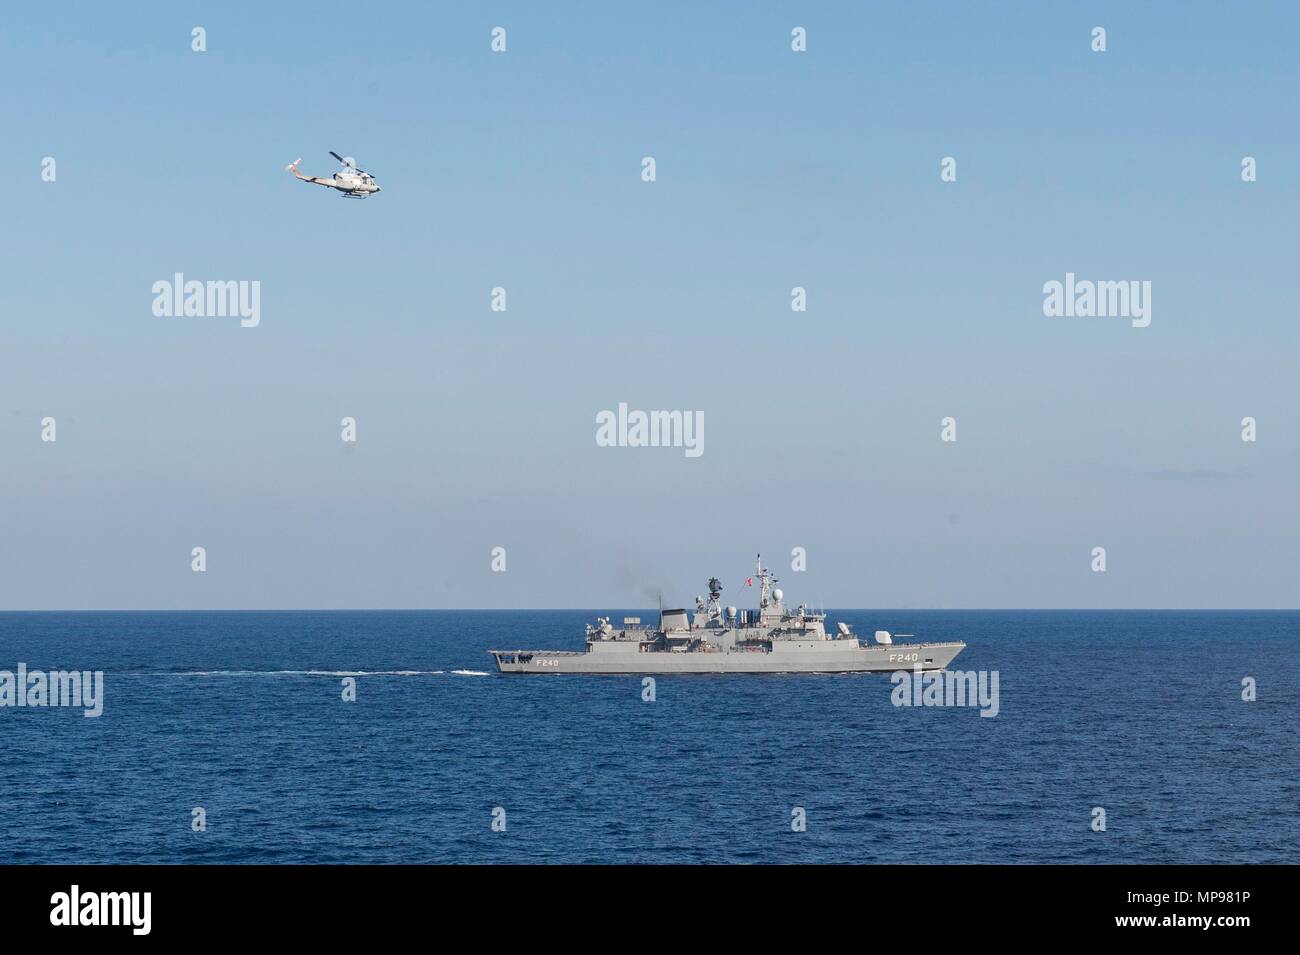 A U.S. Navy Agusta AB 212 helicopter flies over the Turkish Navy Yavuz-class guided-missile frigate TCG Yavuz October 15, 2015 in the Mediterranean Sea.   (photo by Jackie Hart via Planetpix) Stock Photo